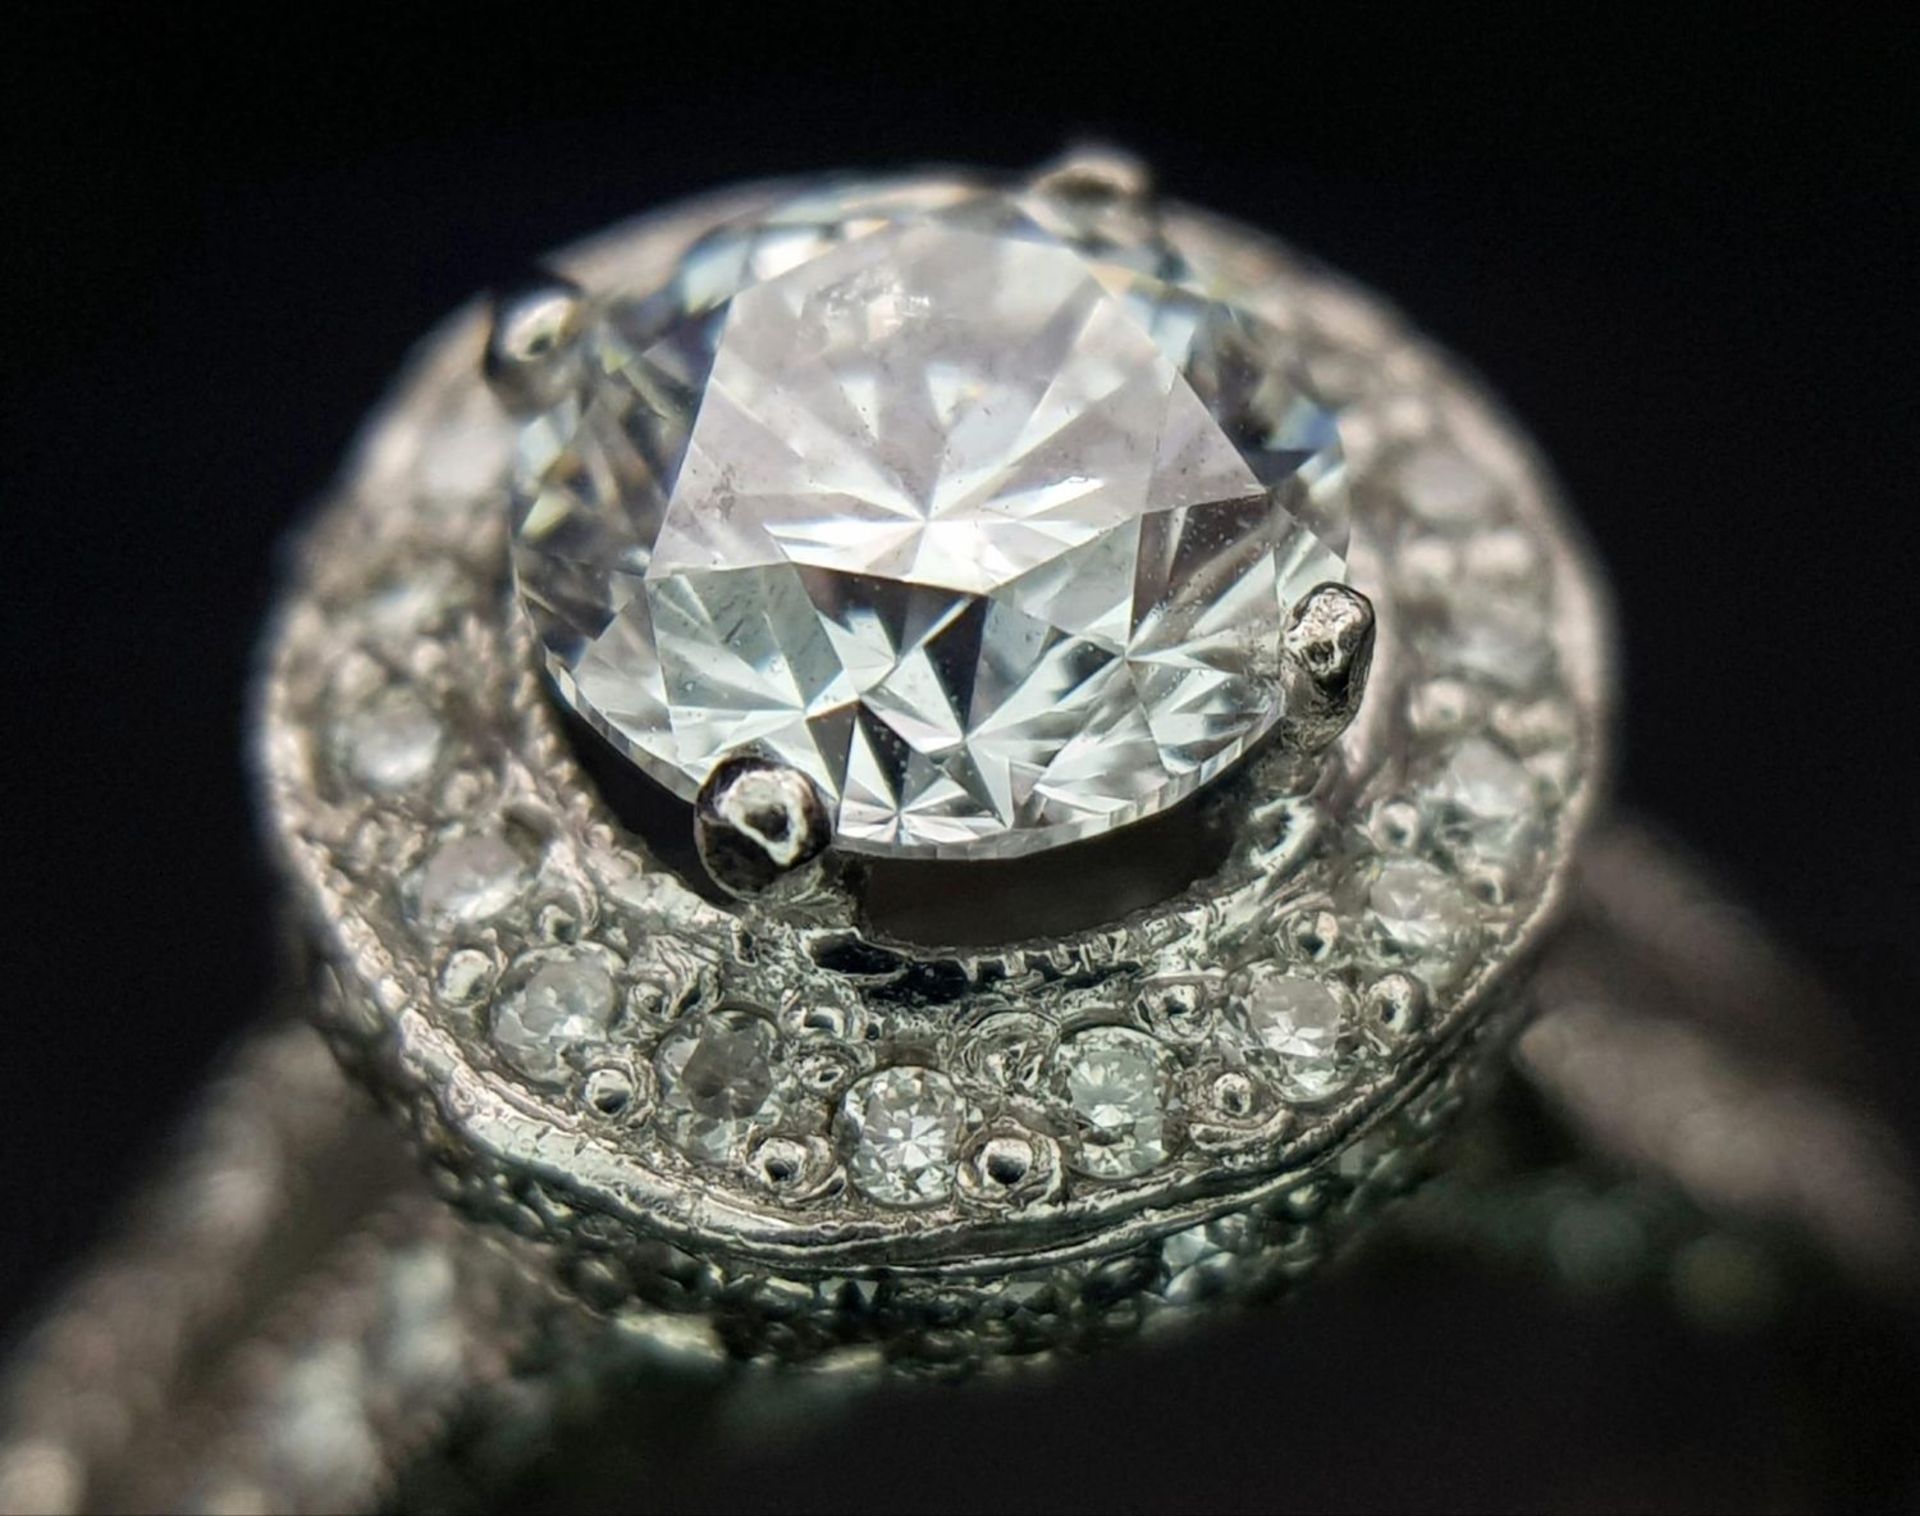 An 18 K white gold ring with a brilliant cut diamond (1.01 carats) surrounded by diamonds on the top - Image 13 of 22